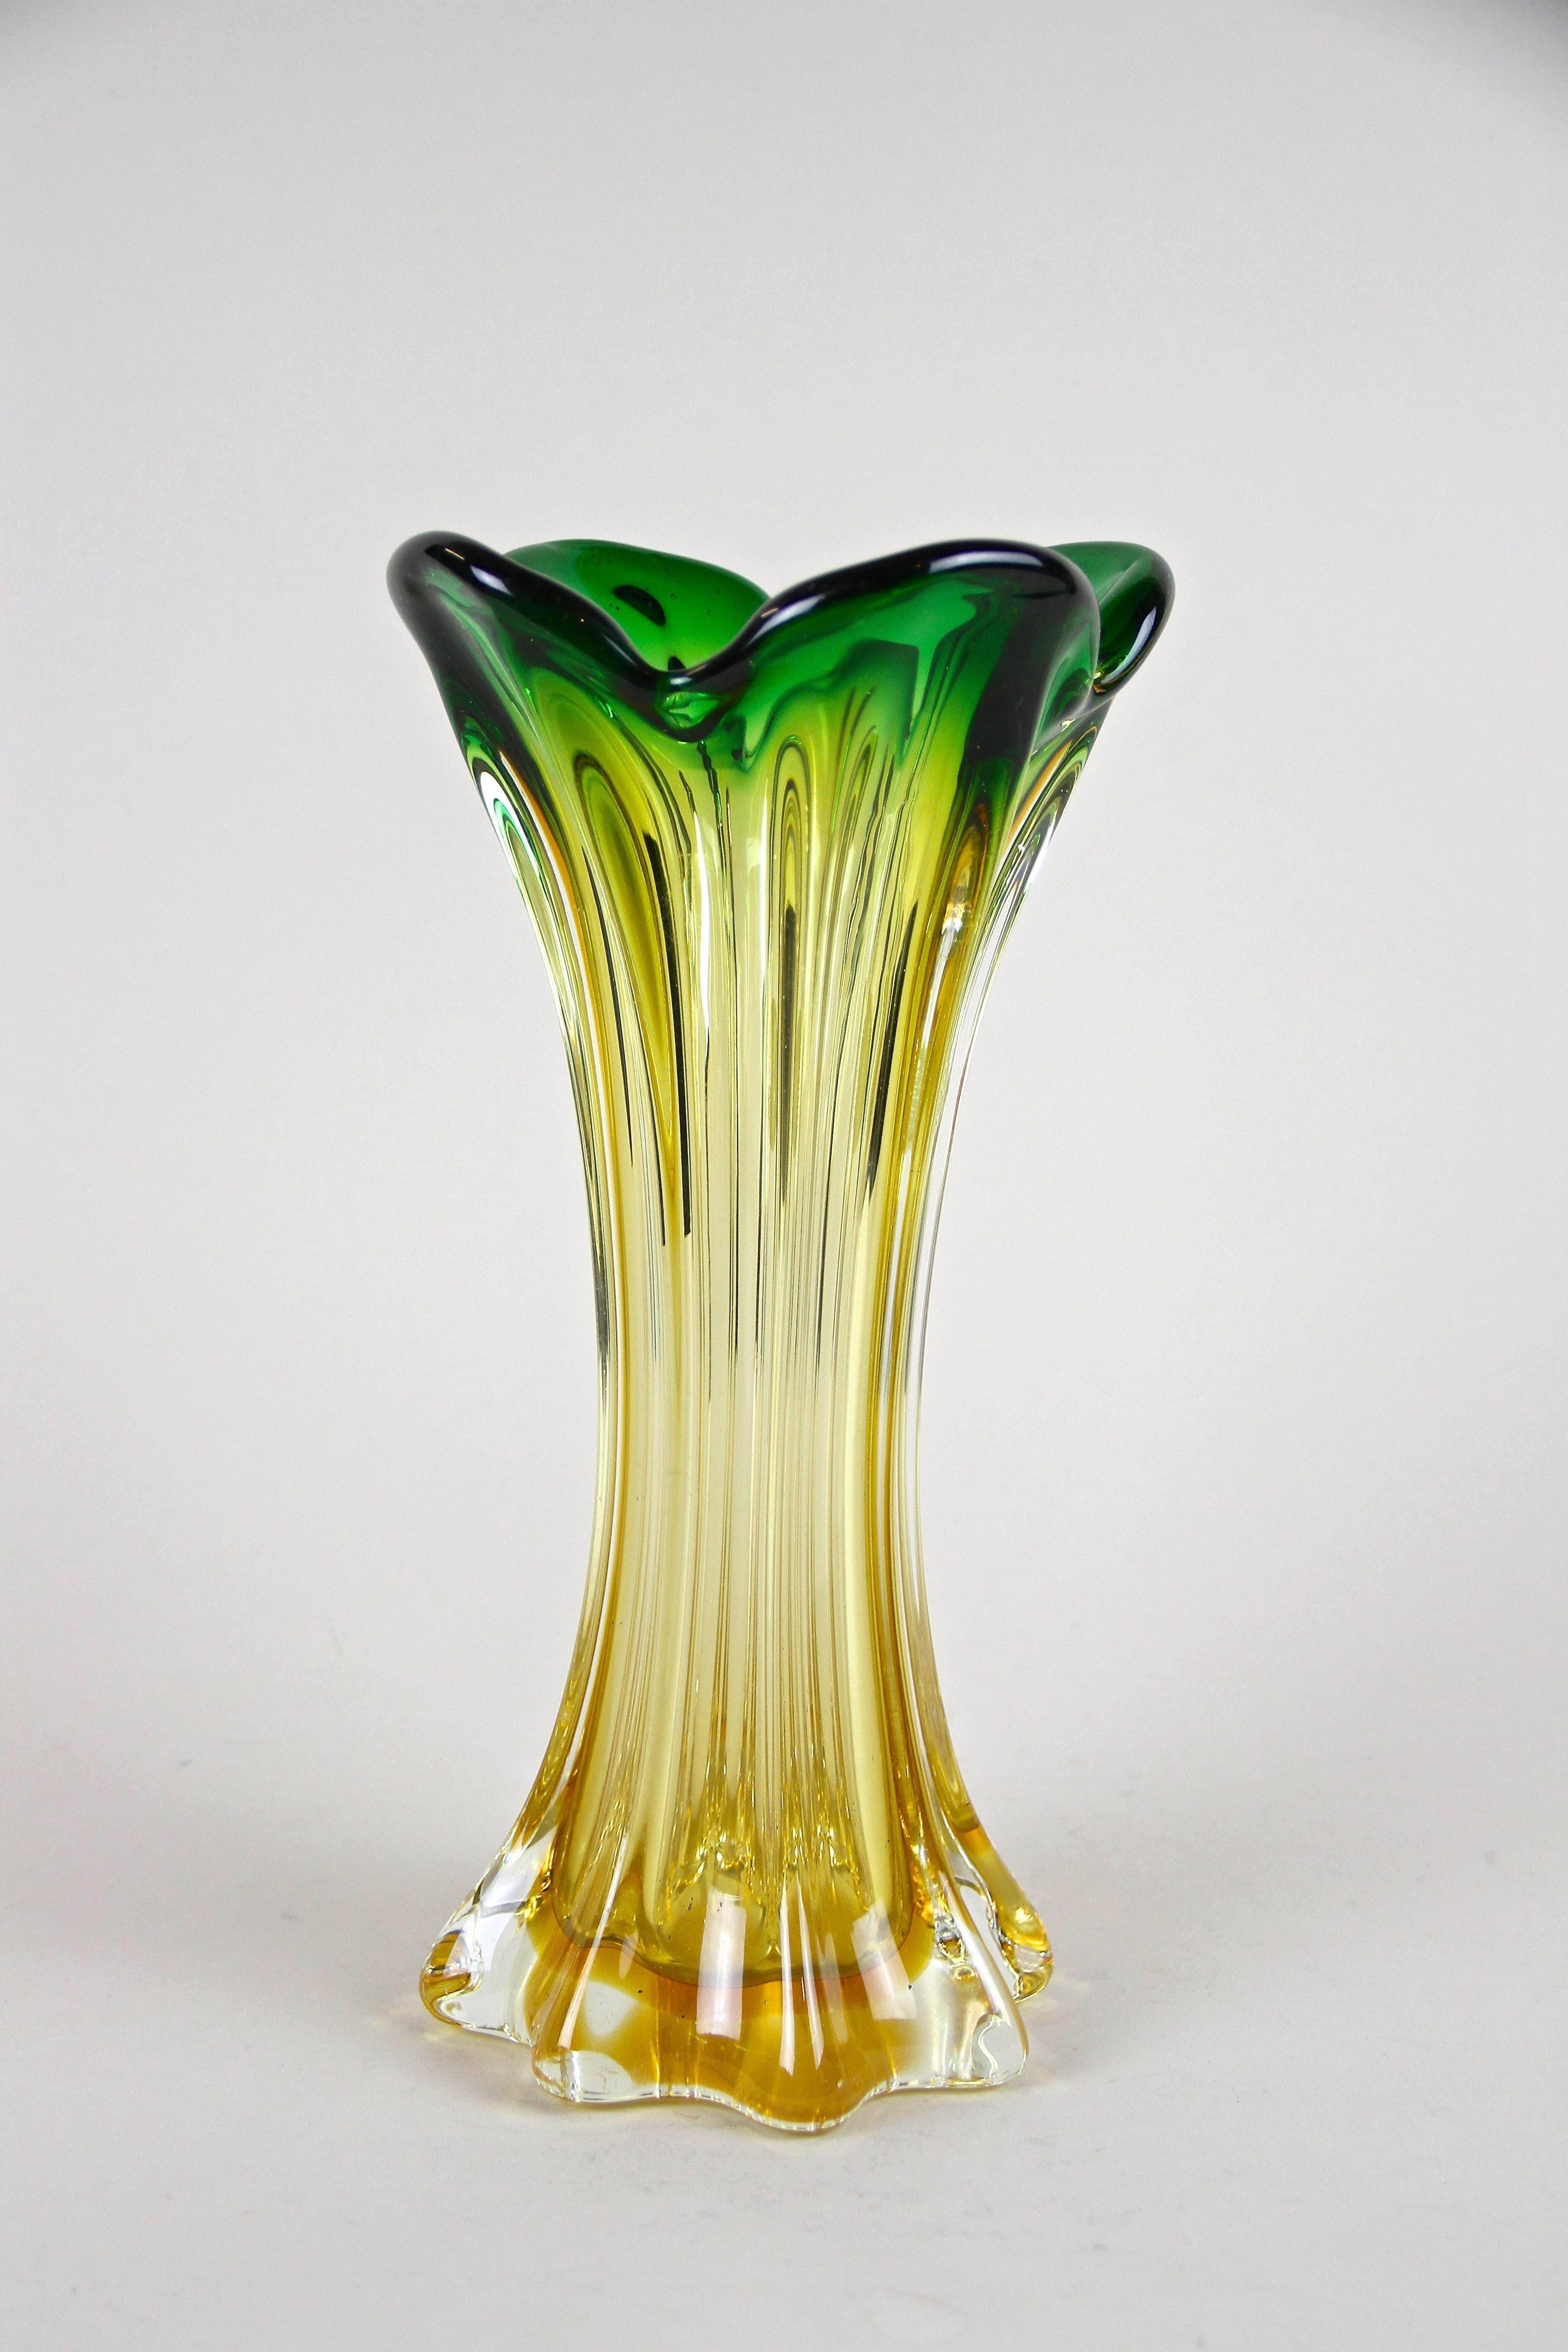 Fantastic looking, large Mid-Century Murano Glass Vase out of the renown glass art workshops of Sommerso in Venetia. Artfully made in Italy around 1960/70 this lovely shaped glass vase impresses with an amazing coloration going from a beautiful